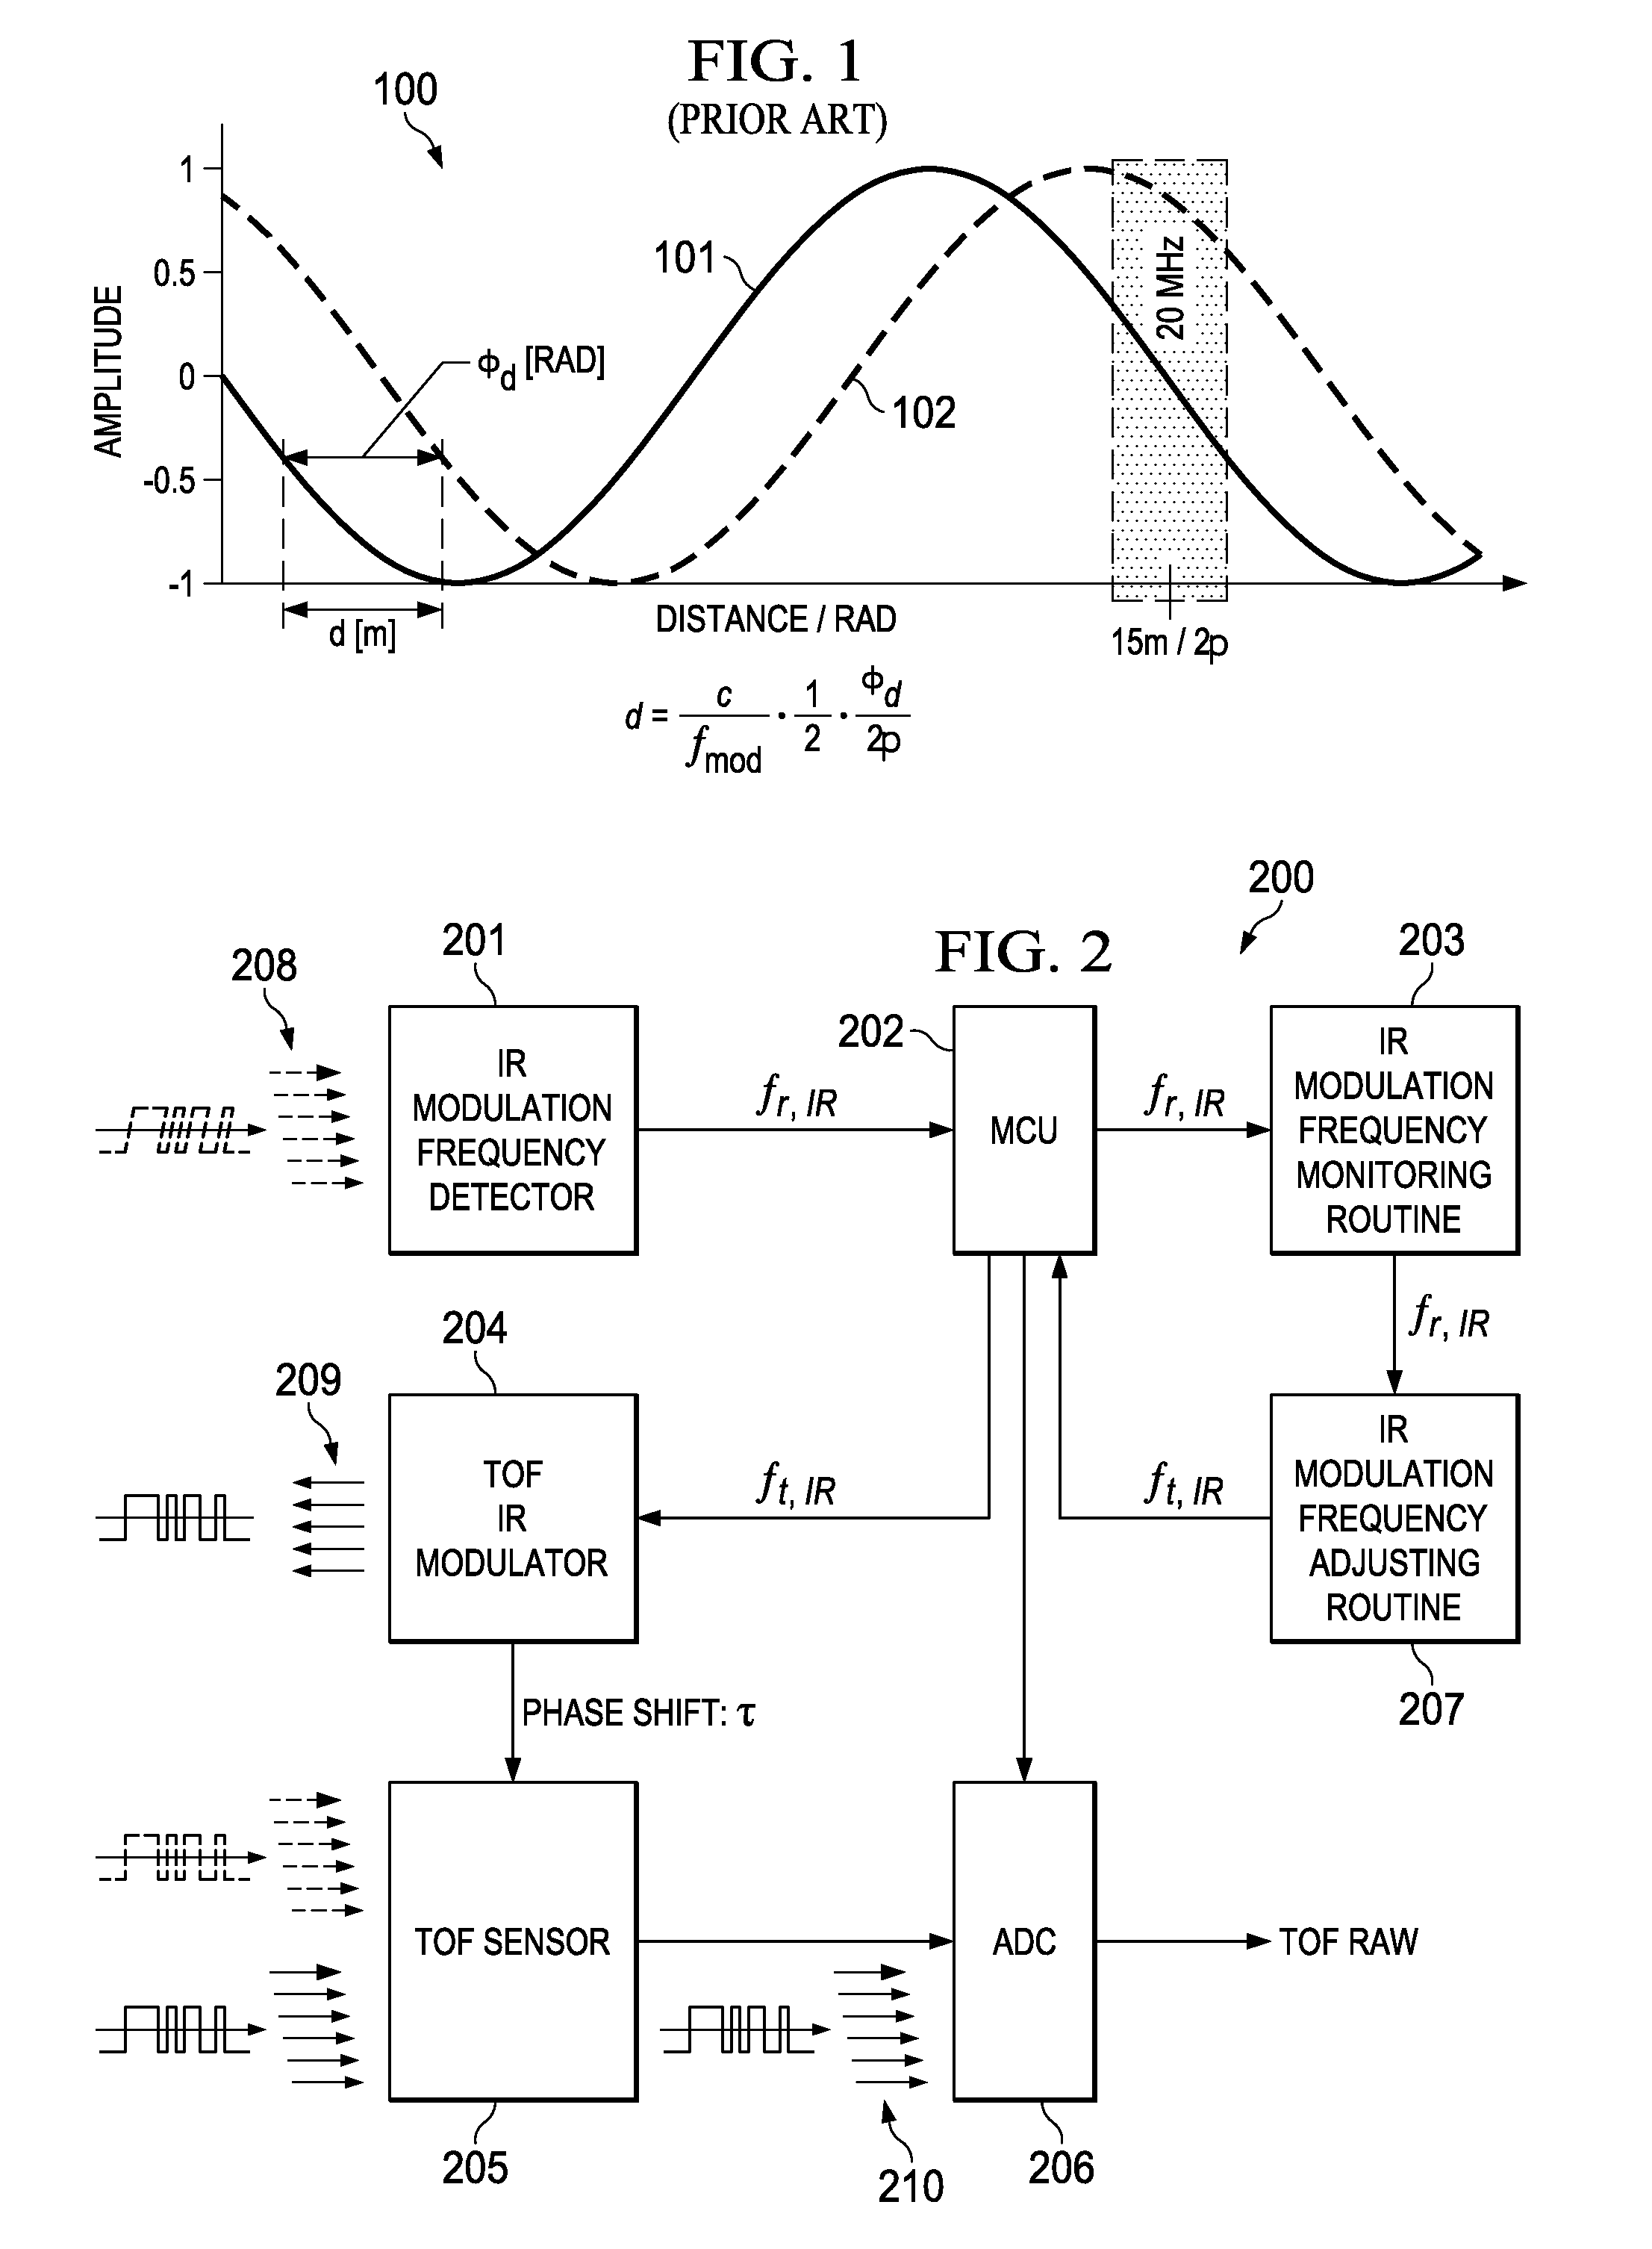 Method for time of flight modulation frequency detection and illumination modulation frequency adjustment